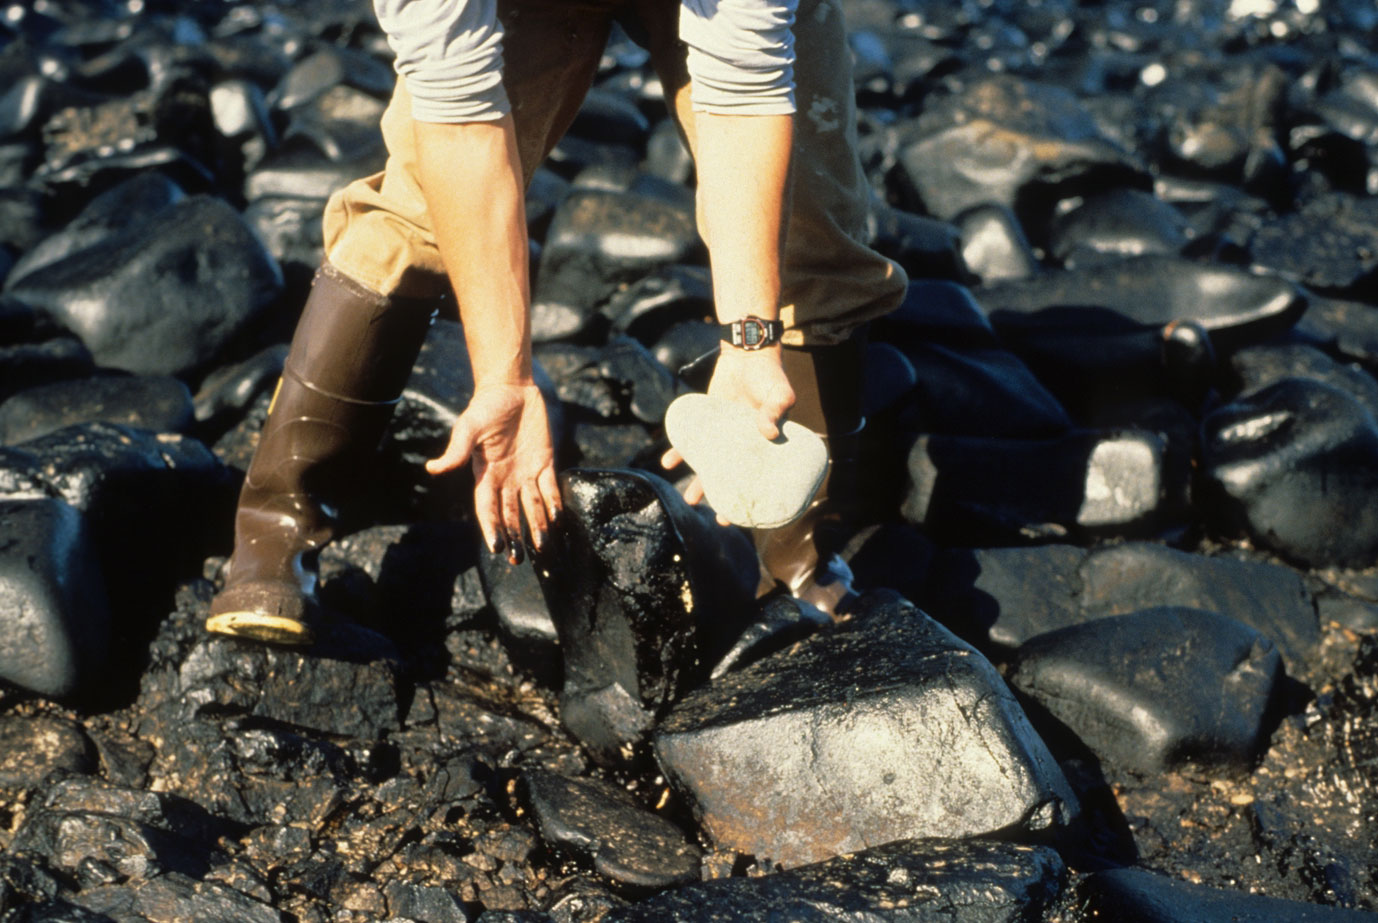 Photograph of the arms and legs of a man who is bending over on a rocky beach. The man is wearing rubber boots. His hands are hanging down, one with the palm facing the camera, the other holding a rock. The fingers of the open hand are stained black with oil. The rock is white, contrasting with the shiny black rocks that have been coated with oil on the beach.